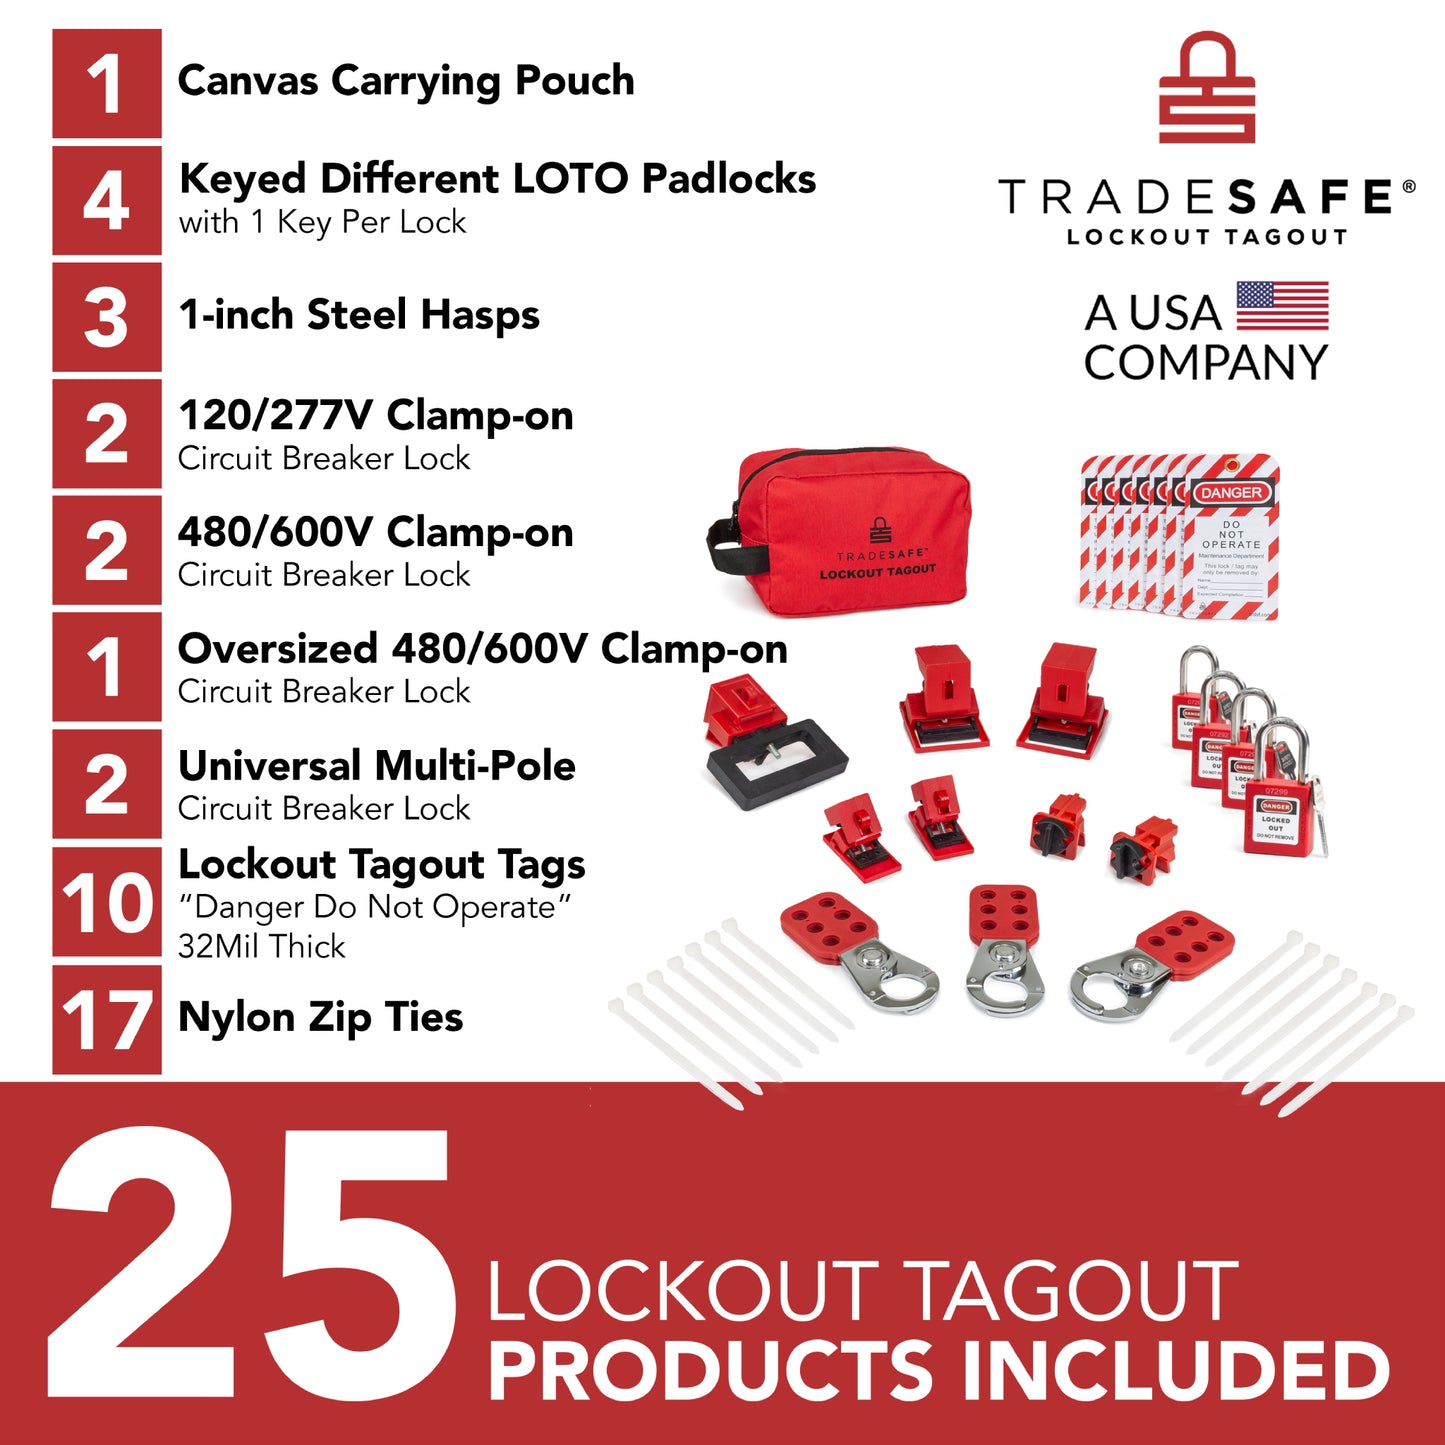 infographic of Lockout Tagout kit indicating components and quantities of each